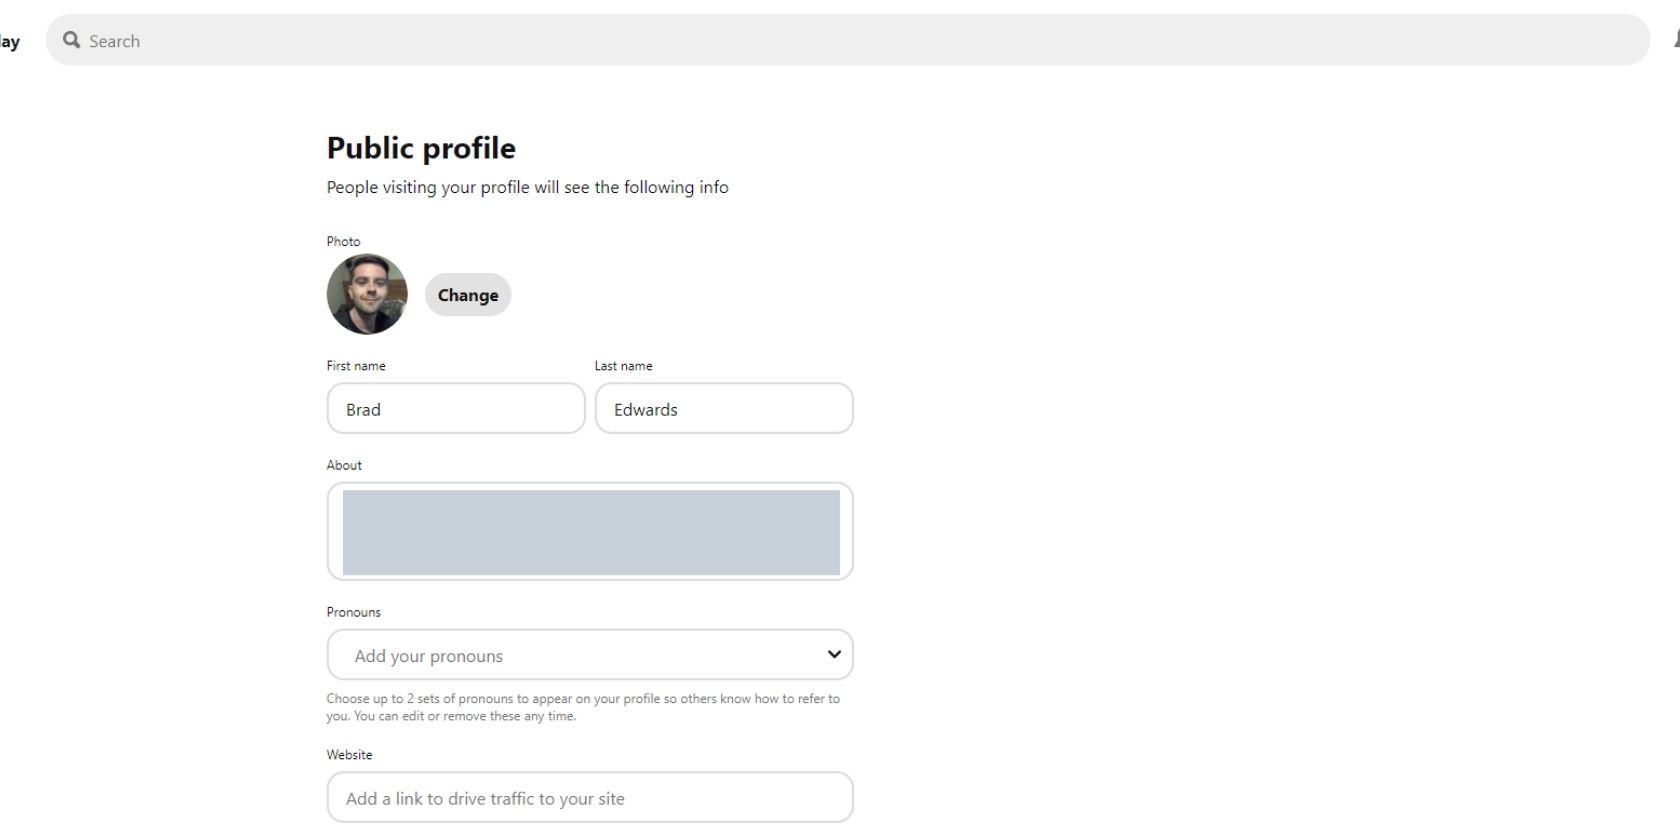 The public profile page on the Pinterest web browser version.